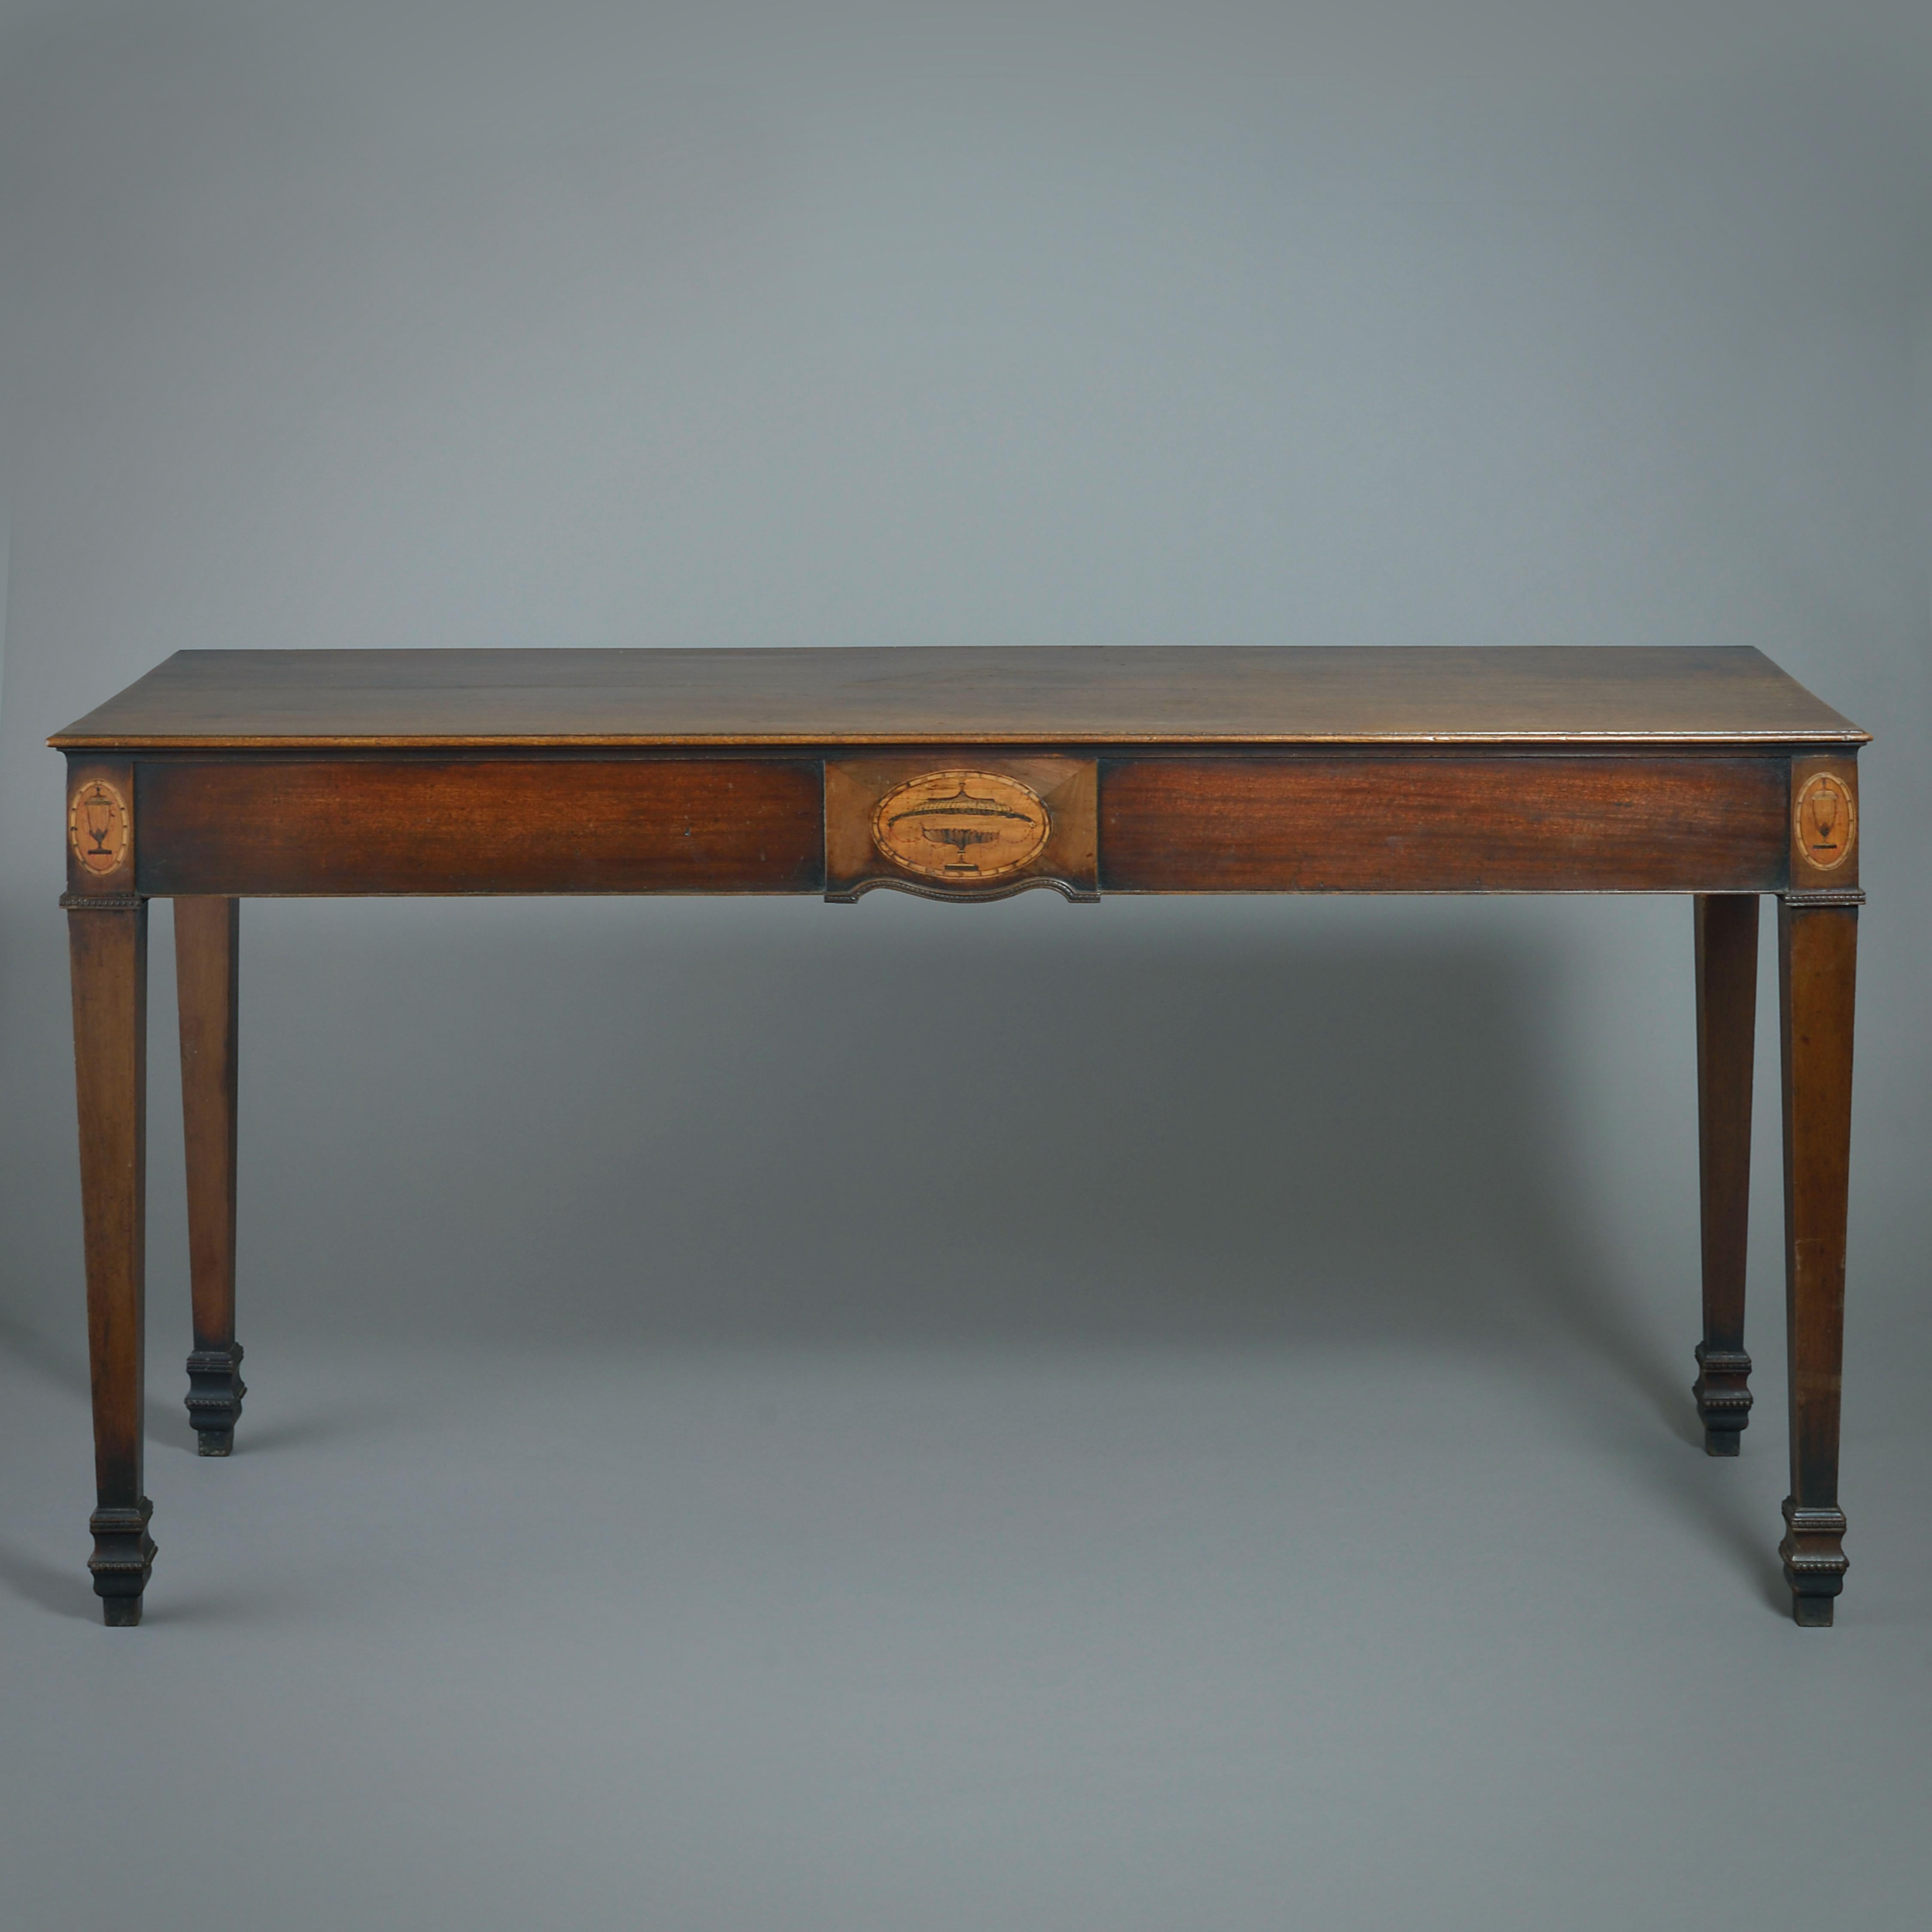 A FINE IRISH GEORGE III MARQUETRY-INLAID MAHOGANY SIDE TABLE, CIRCA 1780.

The shaped frieze centred by an oval panel inlaid with an urn, the square tapering legs headed by similarly inlaid panels.